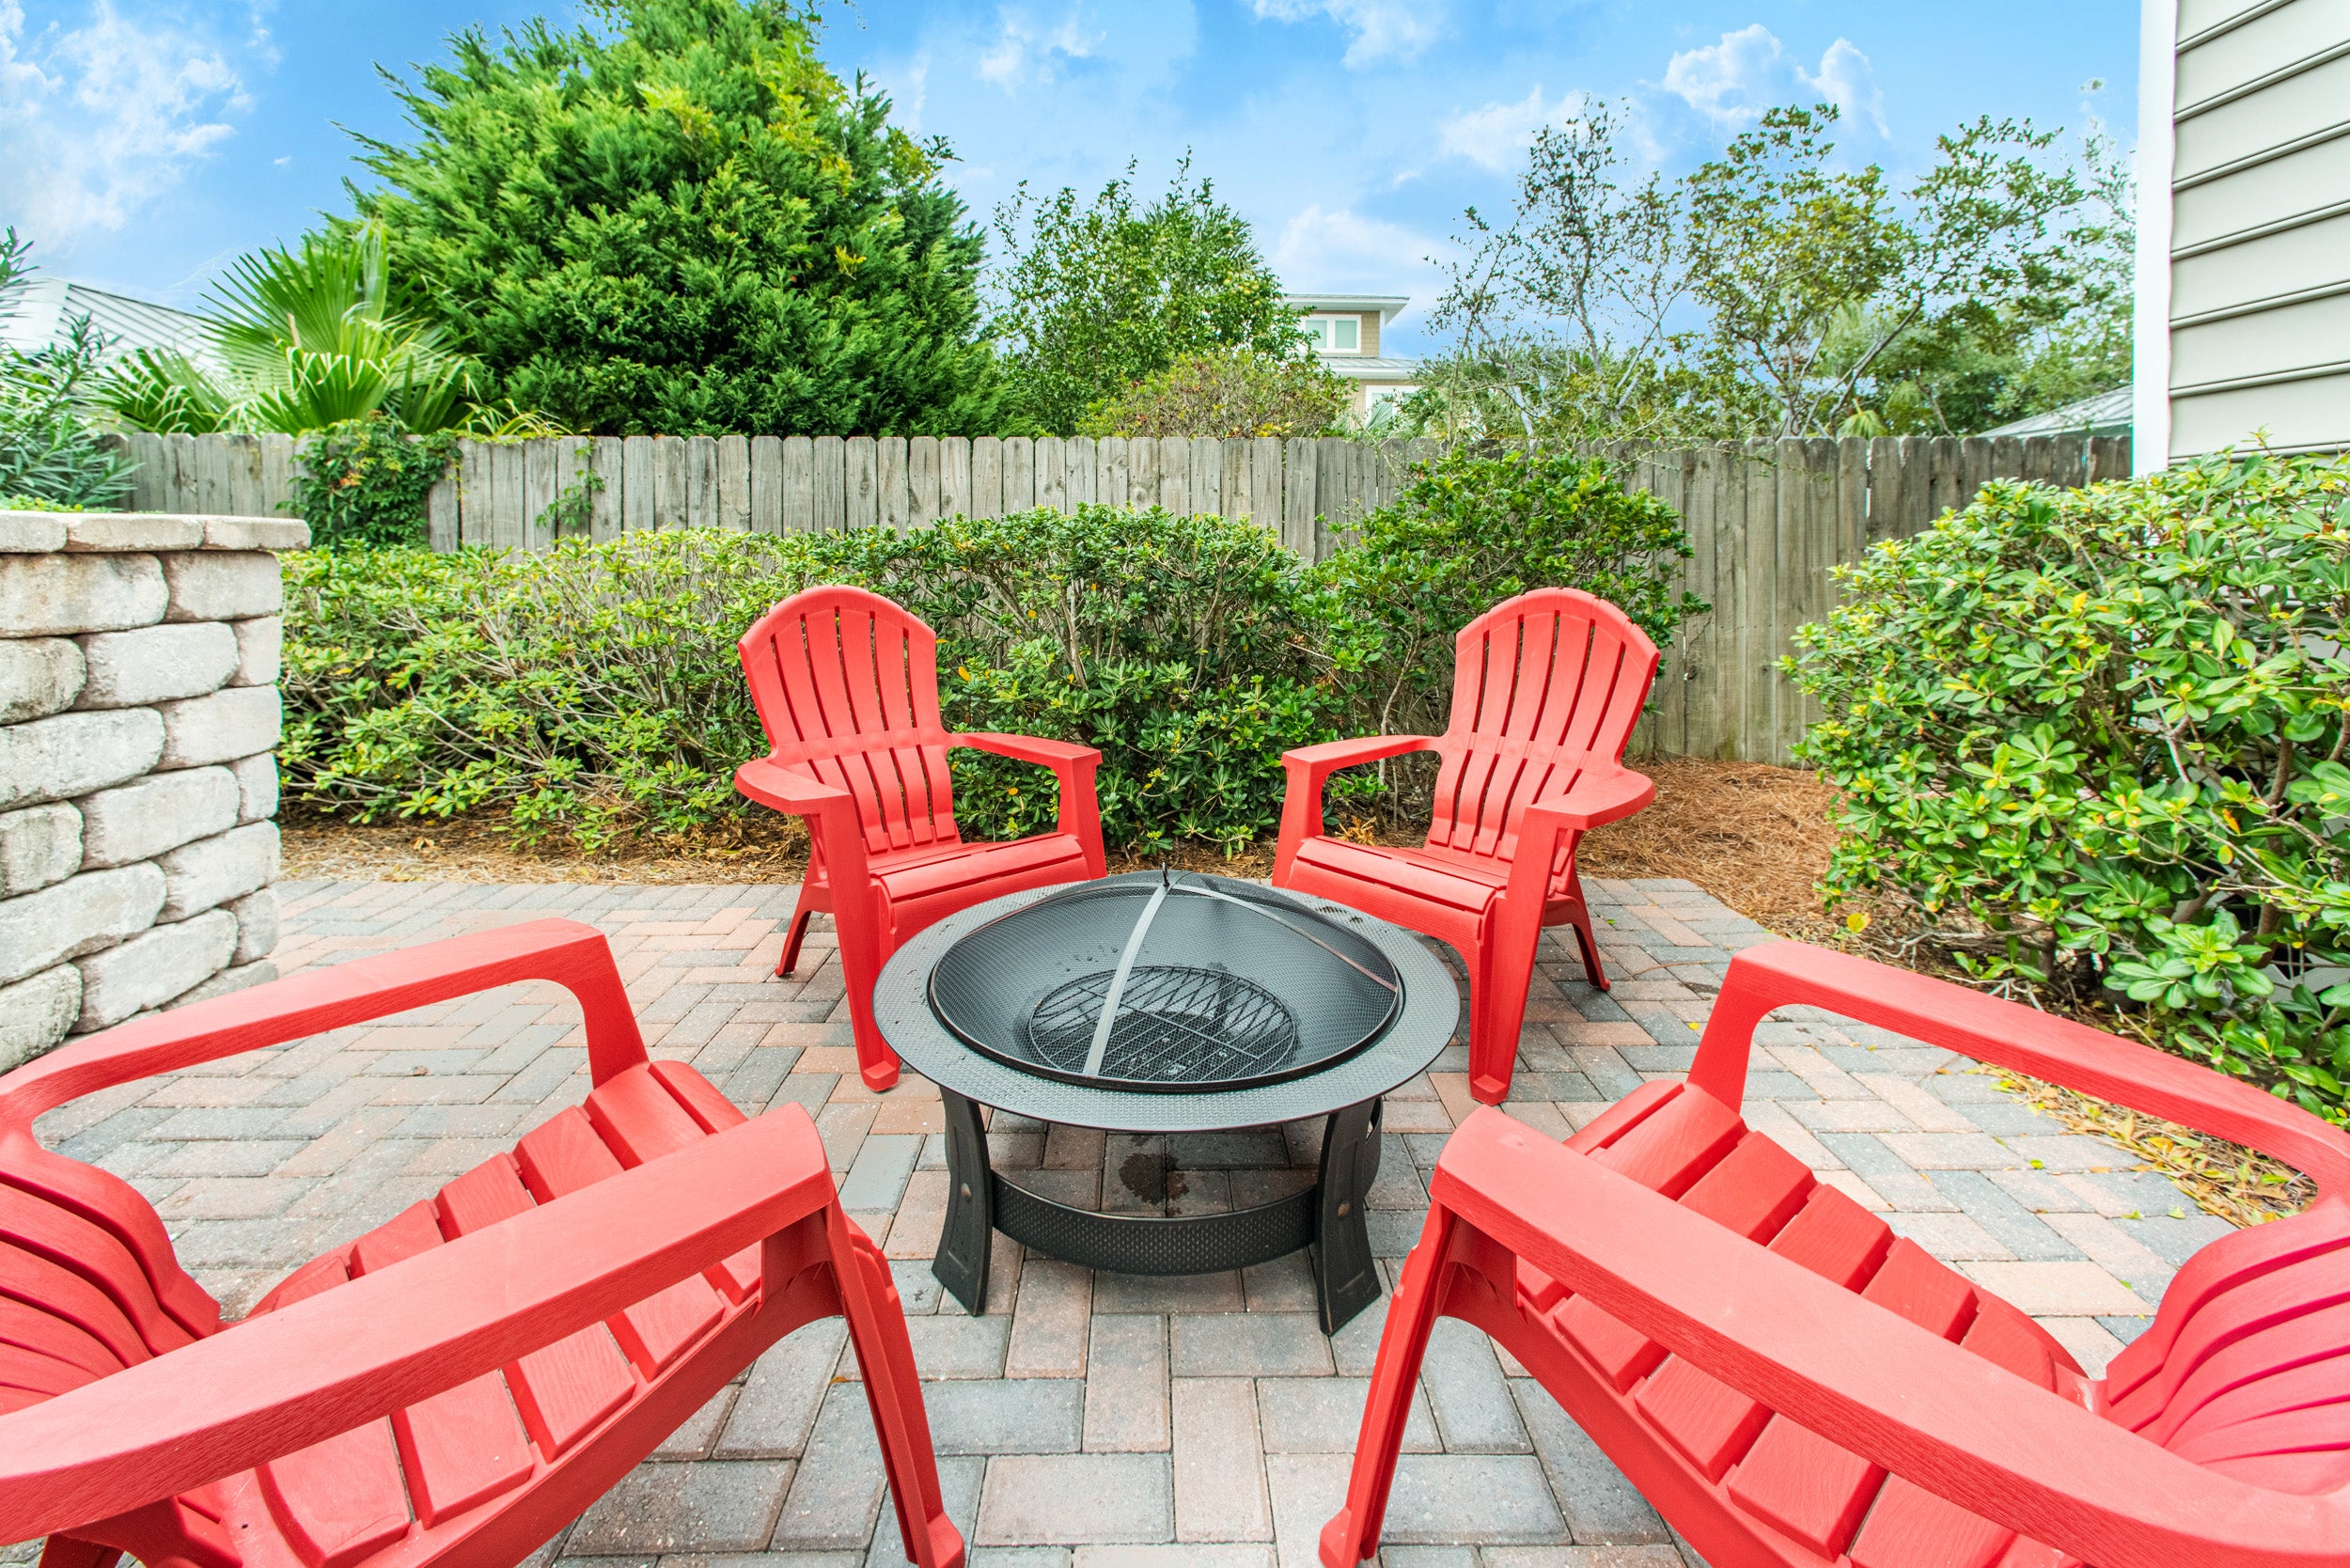 Sit around the fire pit and relax